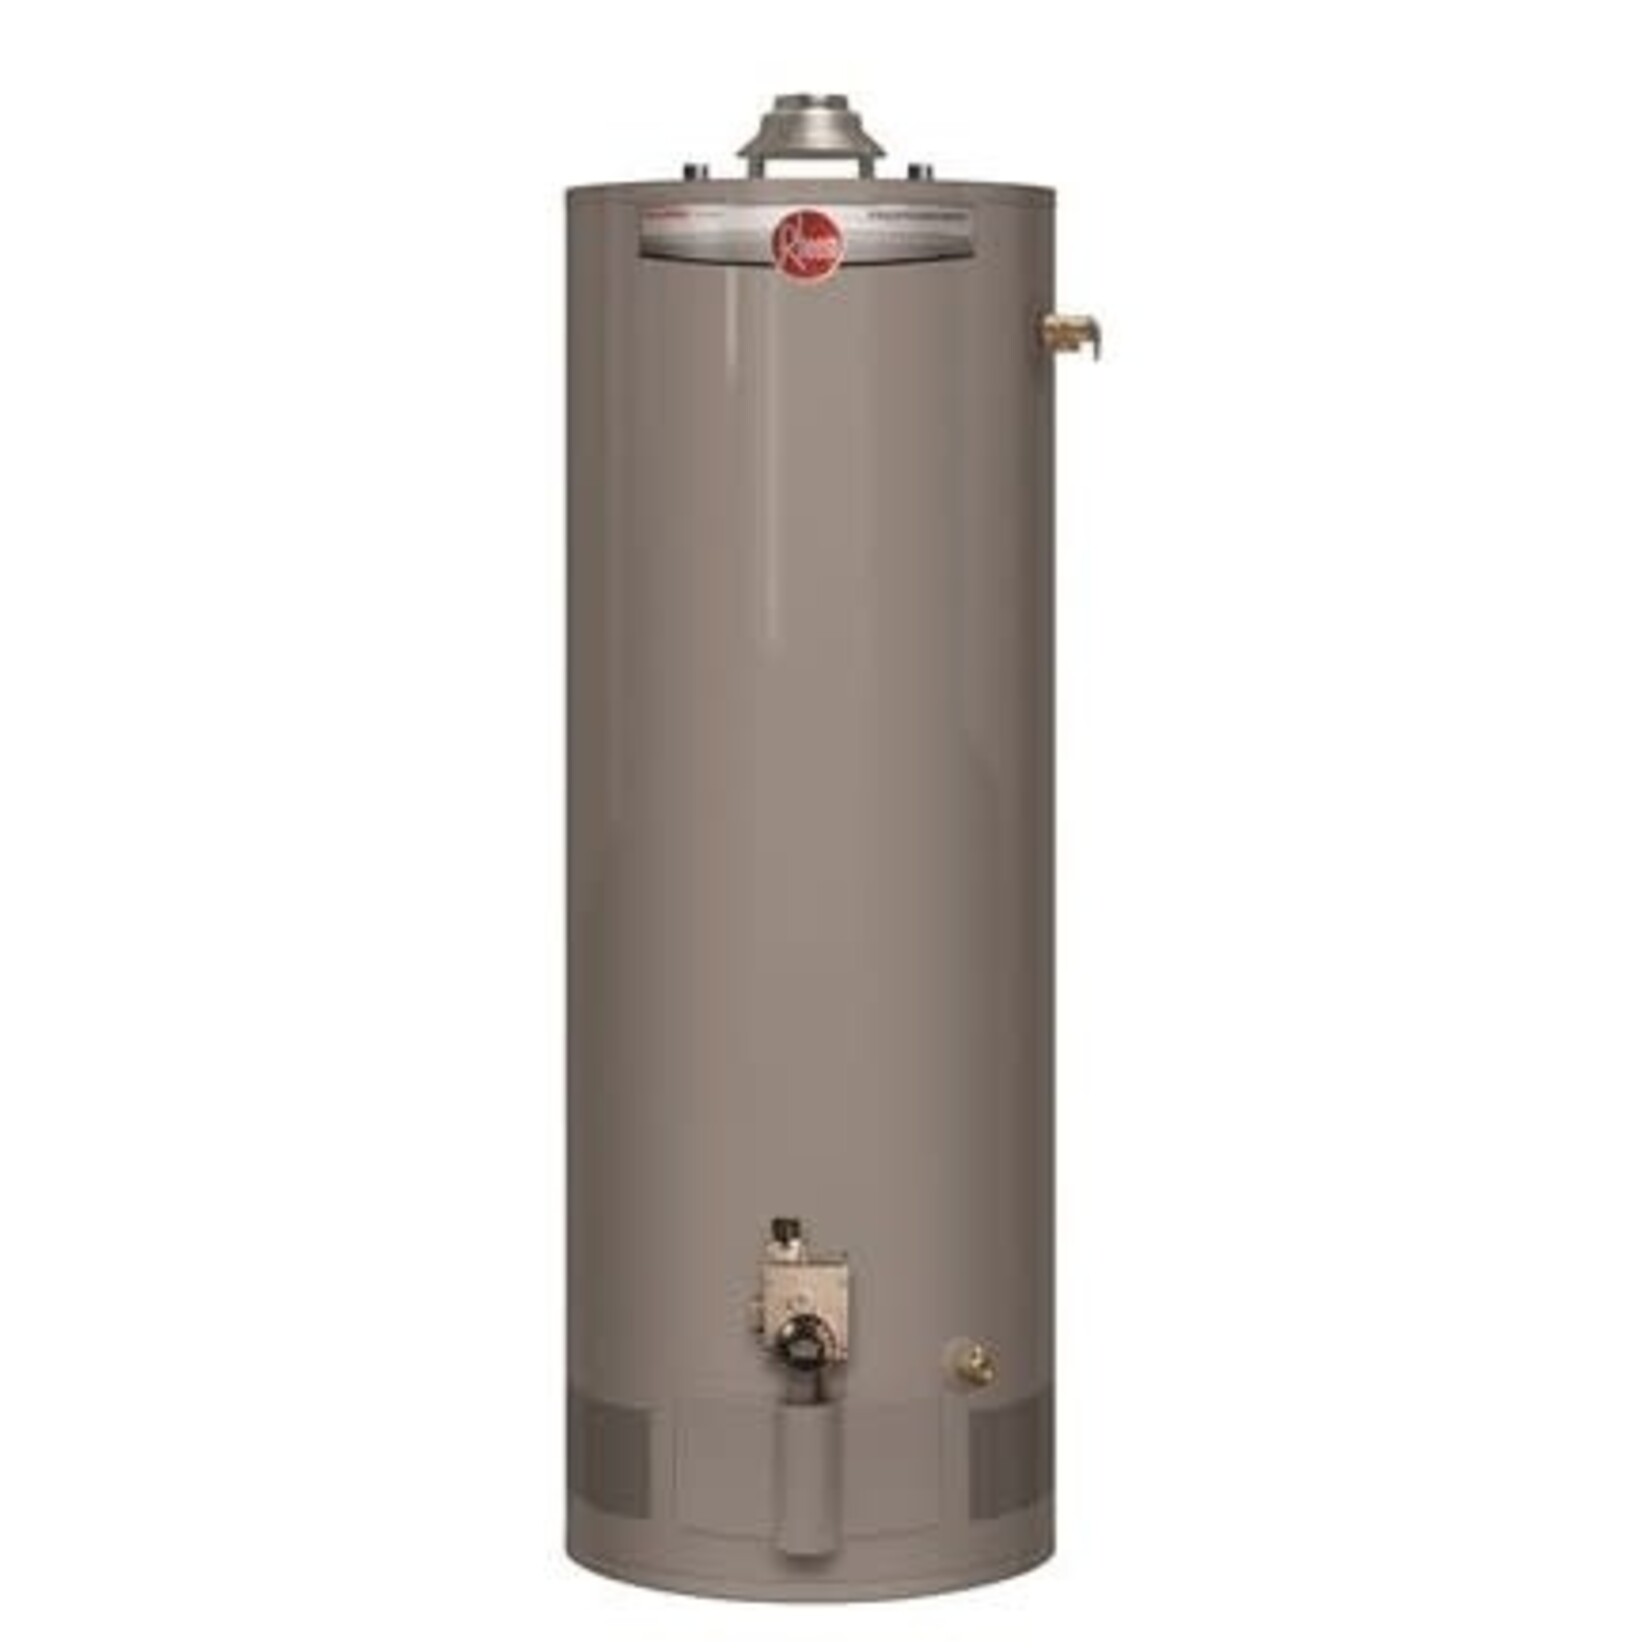 RHEEM RHEEM 50 GAL. PROFESSIONAL CLASSIC SHORT 40,000 BTU ATMOSPHERIC RESIDENTIAL NATURAL GAS WATER HEATER SIDE T AND P RELIEF VALVE